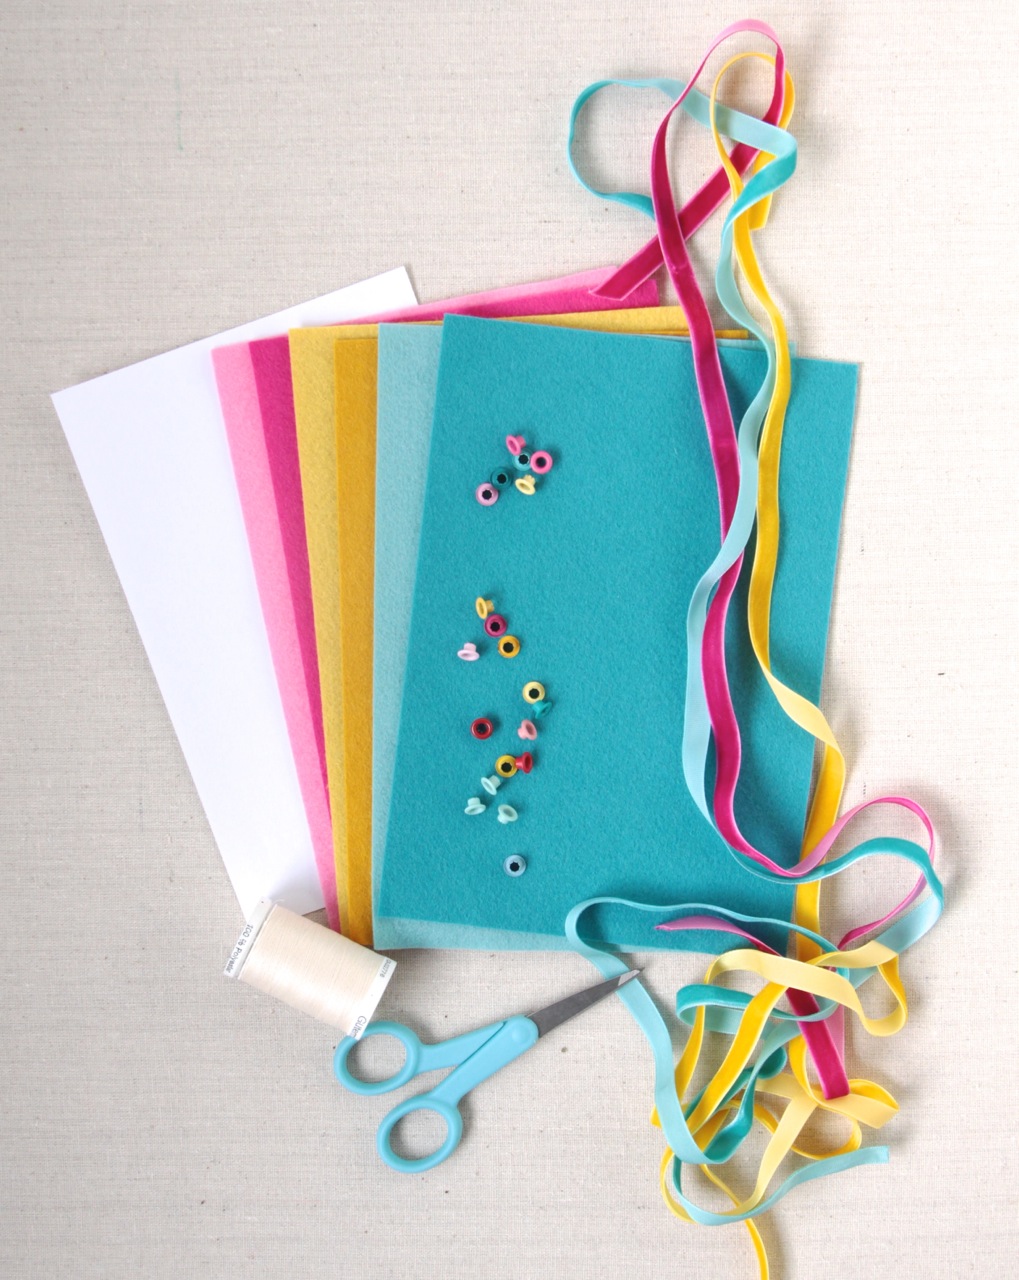 Learn How to Use a Crop-A-Dile - Video Tutorial from BrandysCards